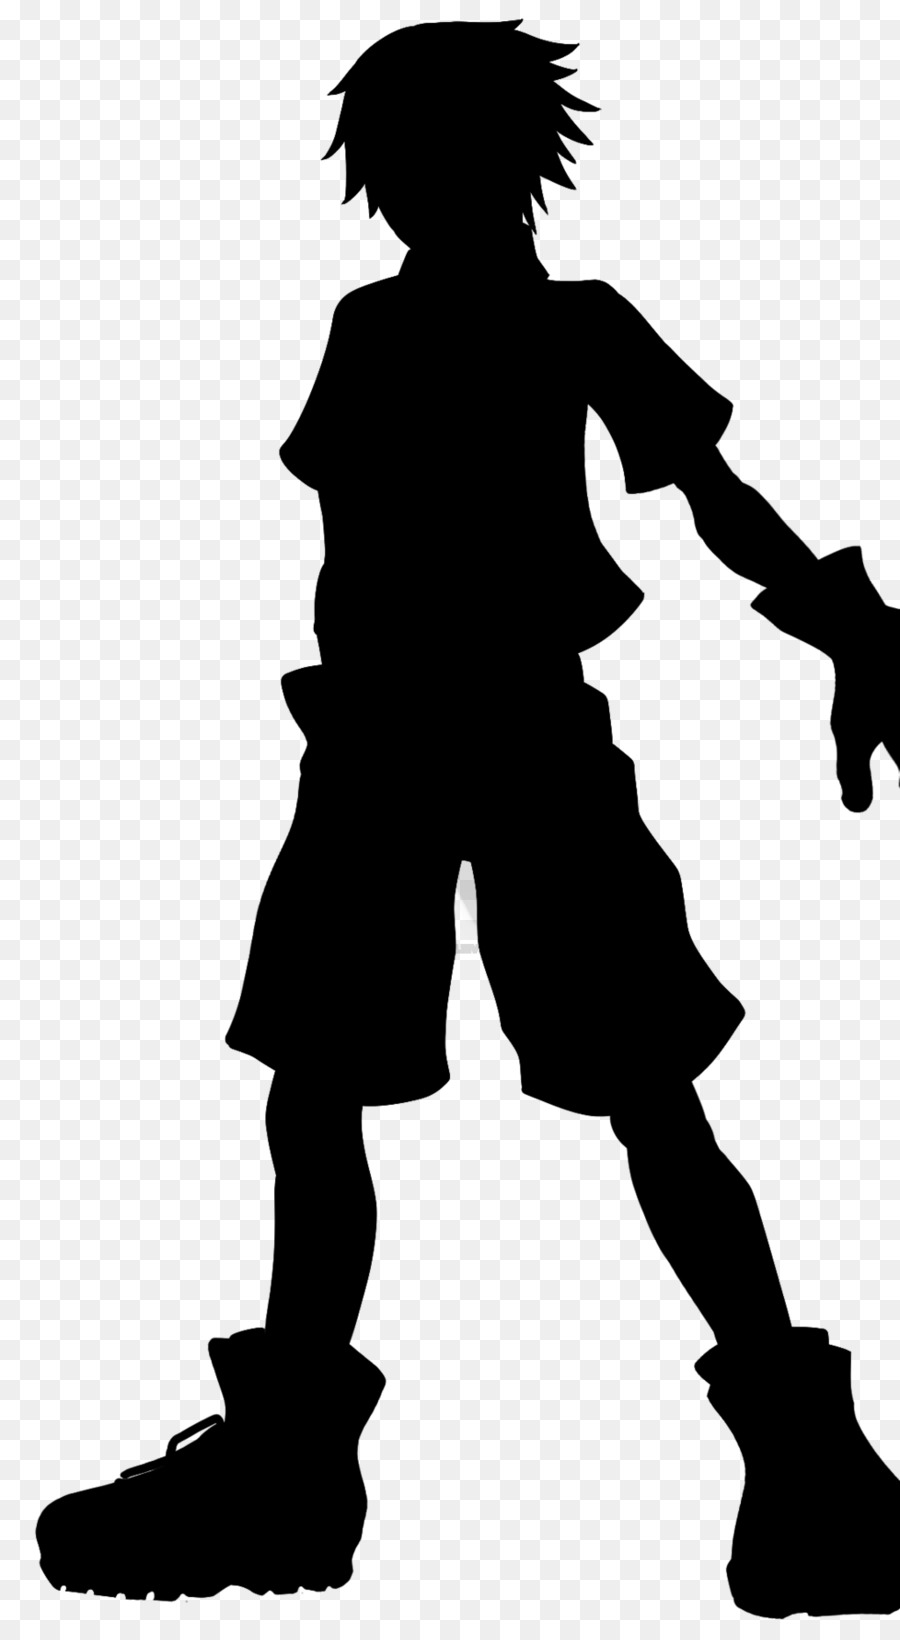 Super Smash Bros. Ultimate Silhouette Shadow Game Image -  png download - 1024*1858 - Free Transparent Super Smash Bros Ultimate png Download.